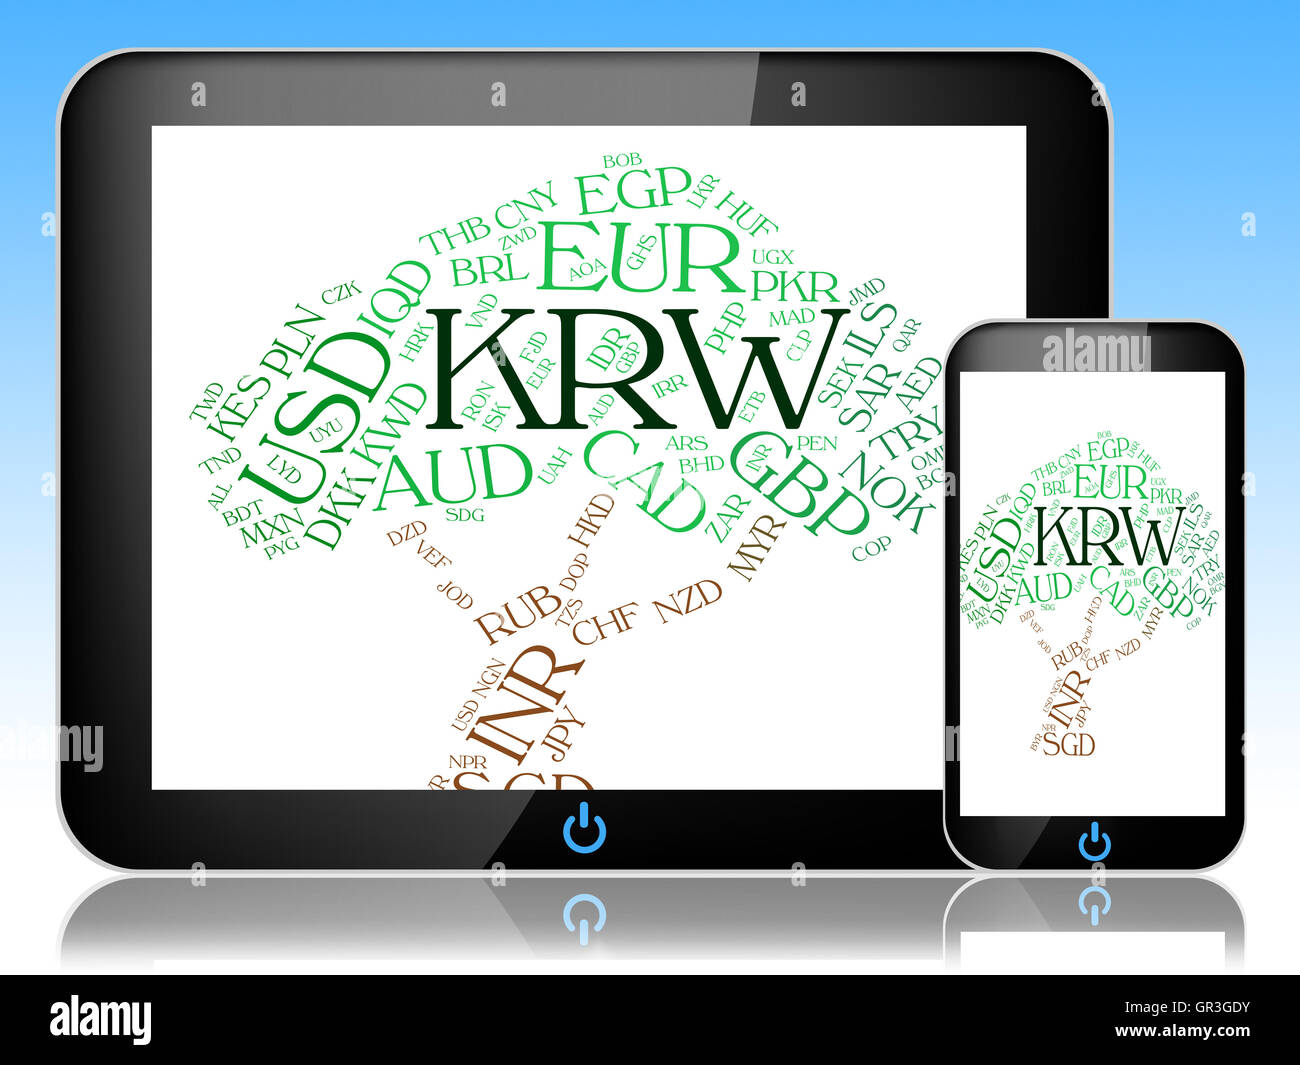 Krw Currency Representing South Korean Won And South Korean Wons Stock Photo